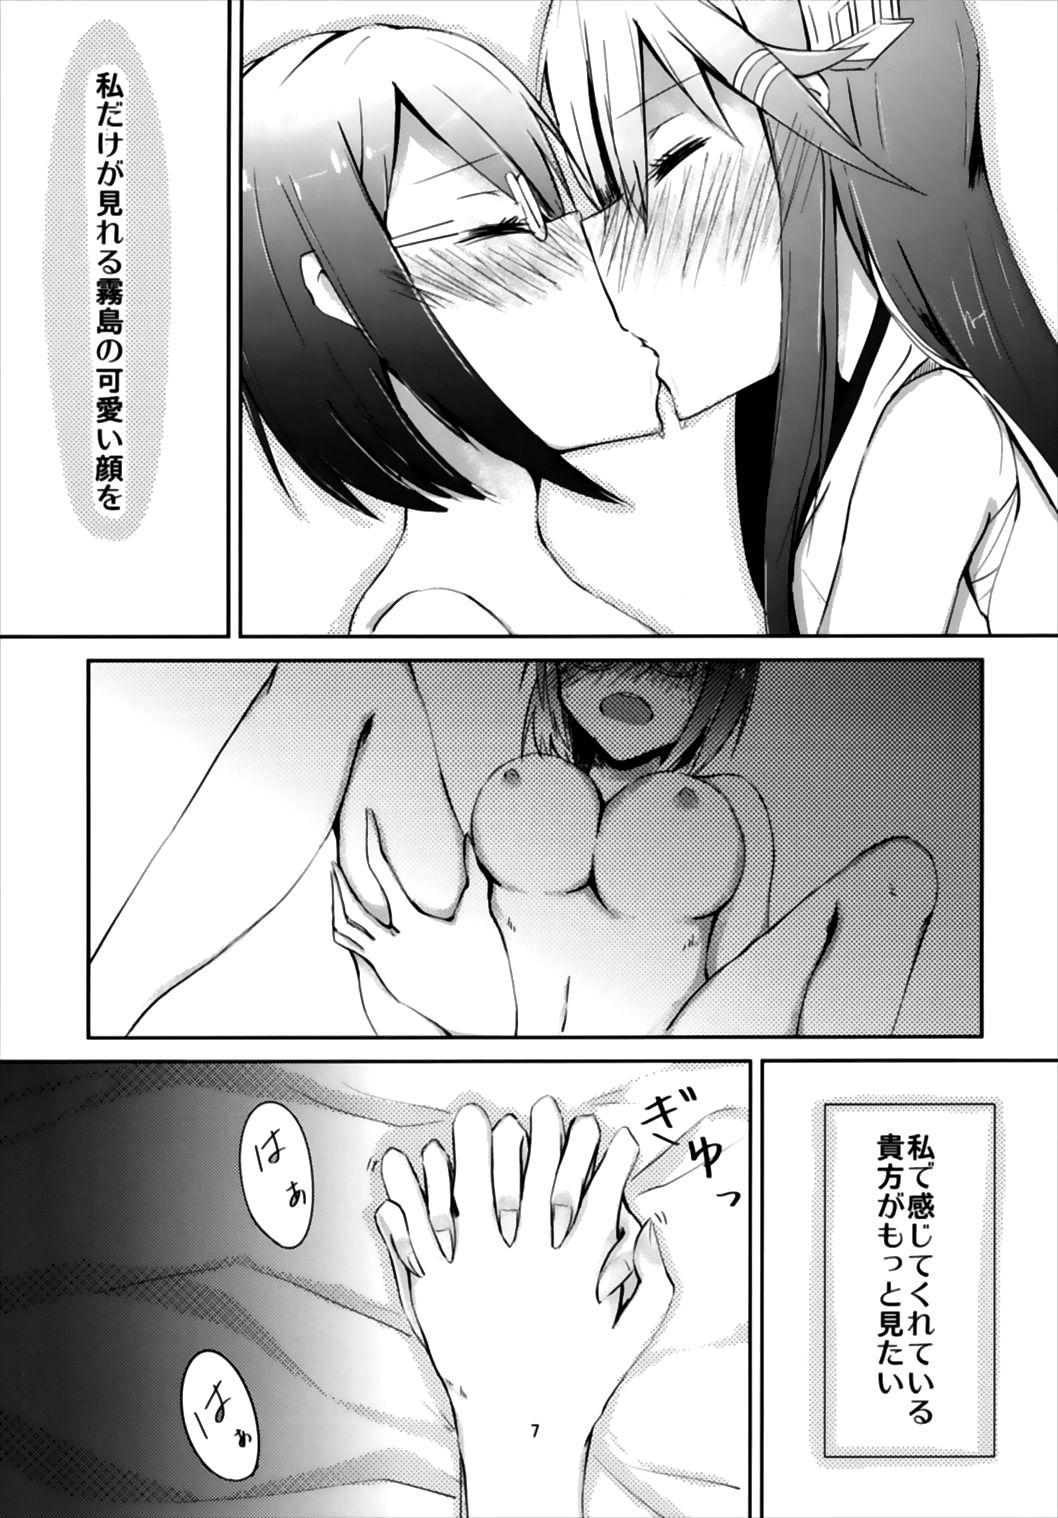 Missionary Position Porn Face to Face - Kantai collection Anal Licking - Page 9